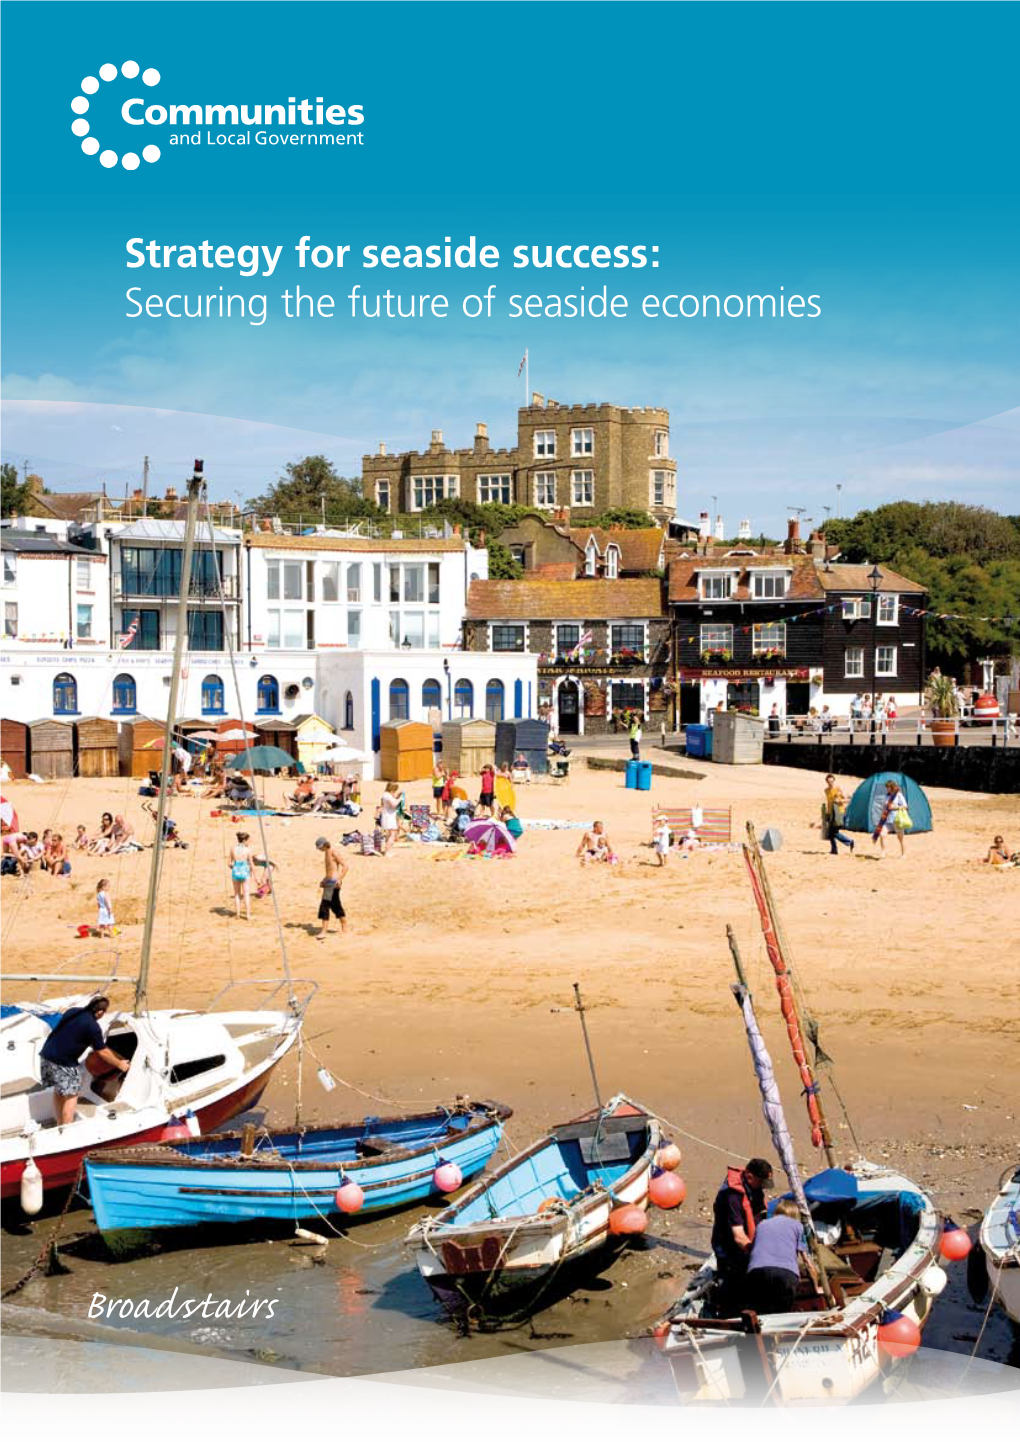 Broadstairs We Want to Ensure Our Seaside Towns Strengthen Their Appeal As Great Places to Live, Work and Visit in the 21St Century